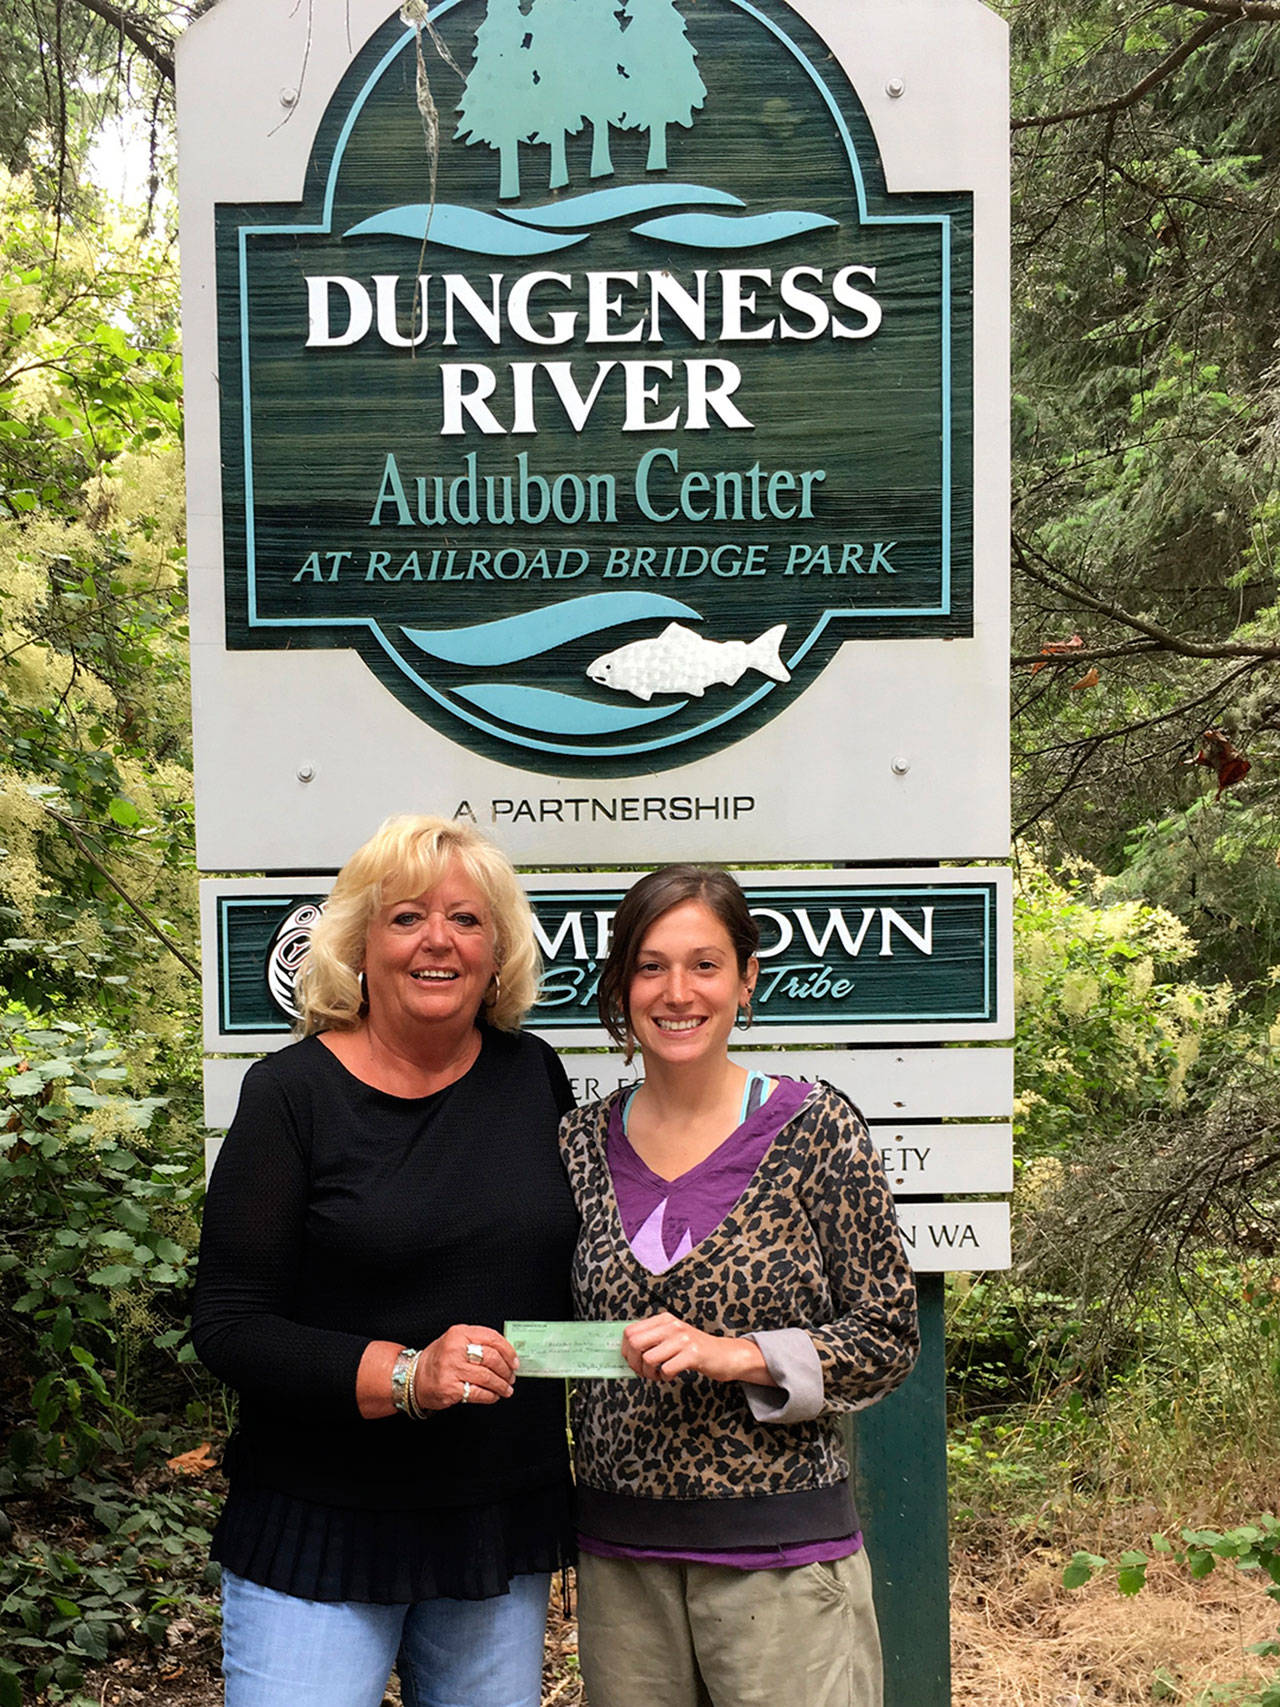 The Newcomers’ Club recently donated $200 to the Dungeness River Audubon Center in appreciation of its commitment to provide educational and environmental programs for adults and children. Jenna Ziogas, right, education and volunteer coordinator of the center, accepts the donation from Cathy Schau, Newcomers’ Club president. Submitted photo